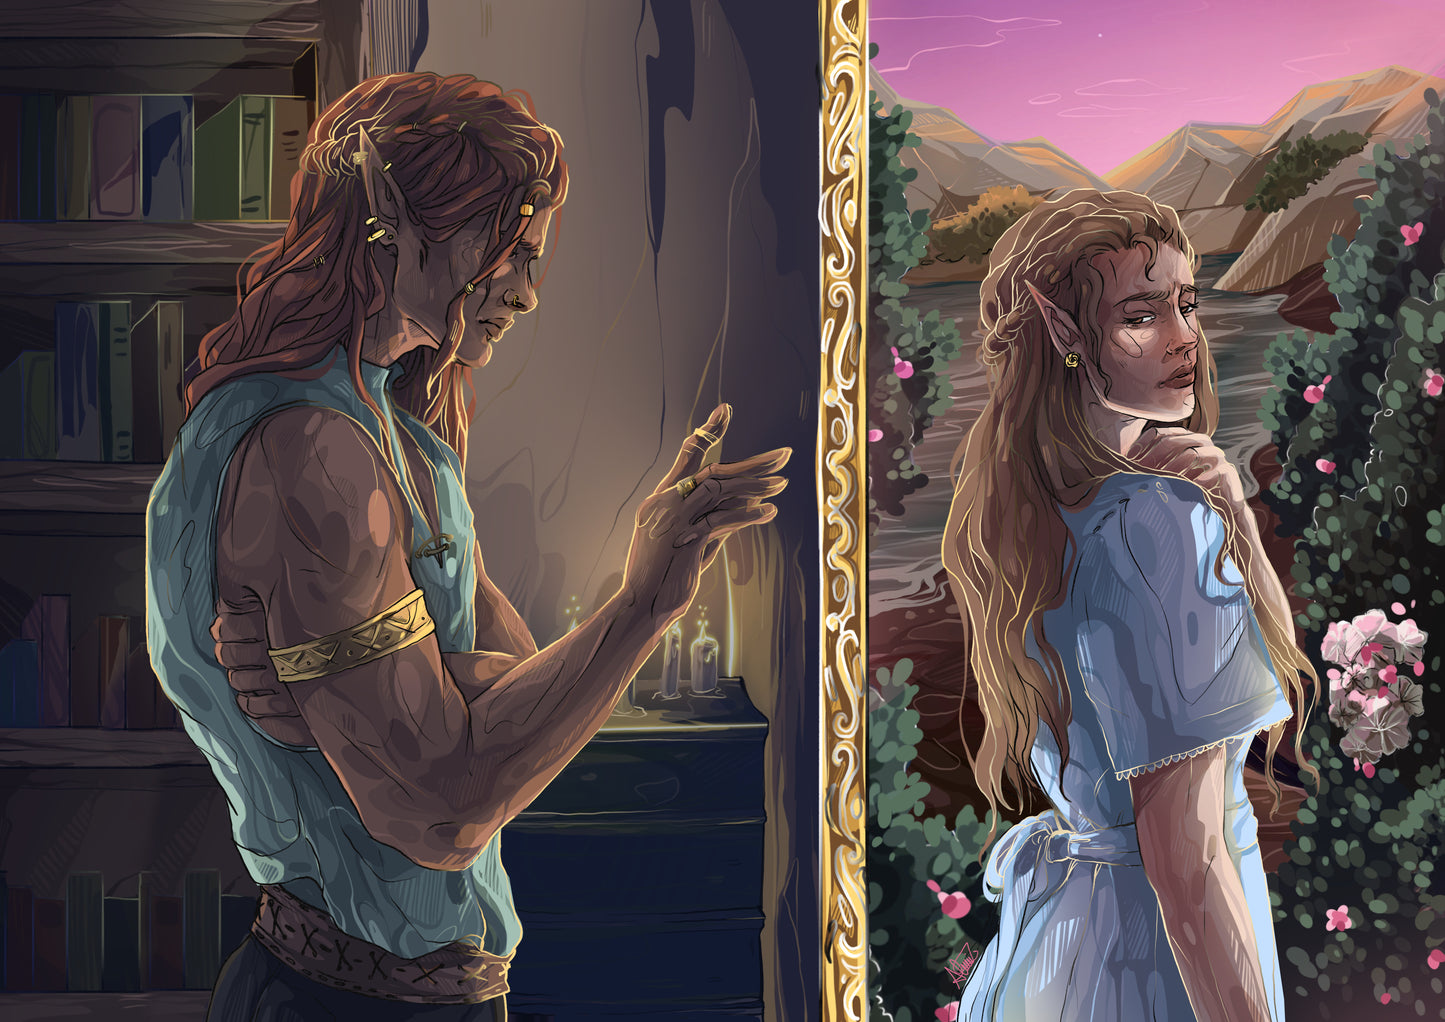 You Betrayed Me - A Court of Thorns and Roses - Elaine and Lucien - Elucian - Officially Licenced - Sarah J. Maas - Print